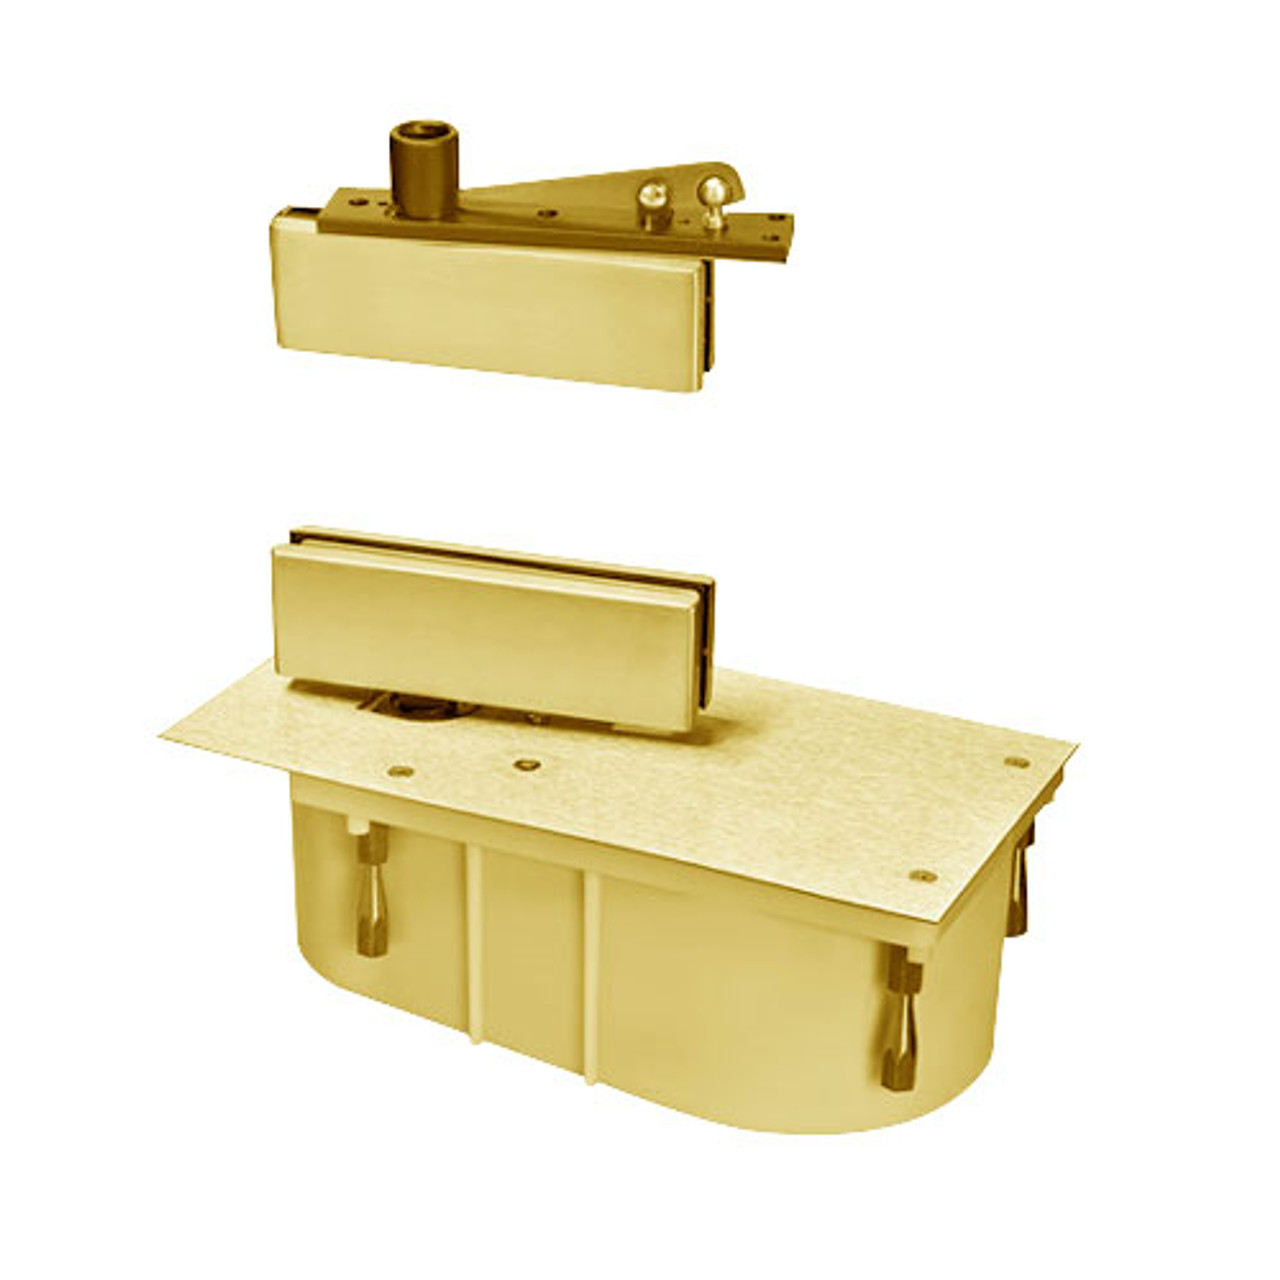 428-90N-LFP-LH-605 Rixson 428 Series Heavy Duty Single Acting Center Hung Floor Closer with Patch Fittings in Bright Brass Finish